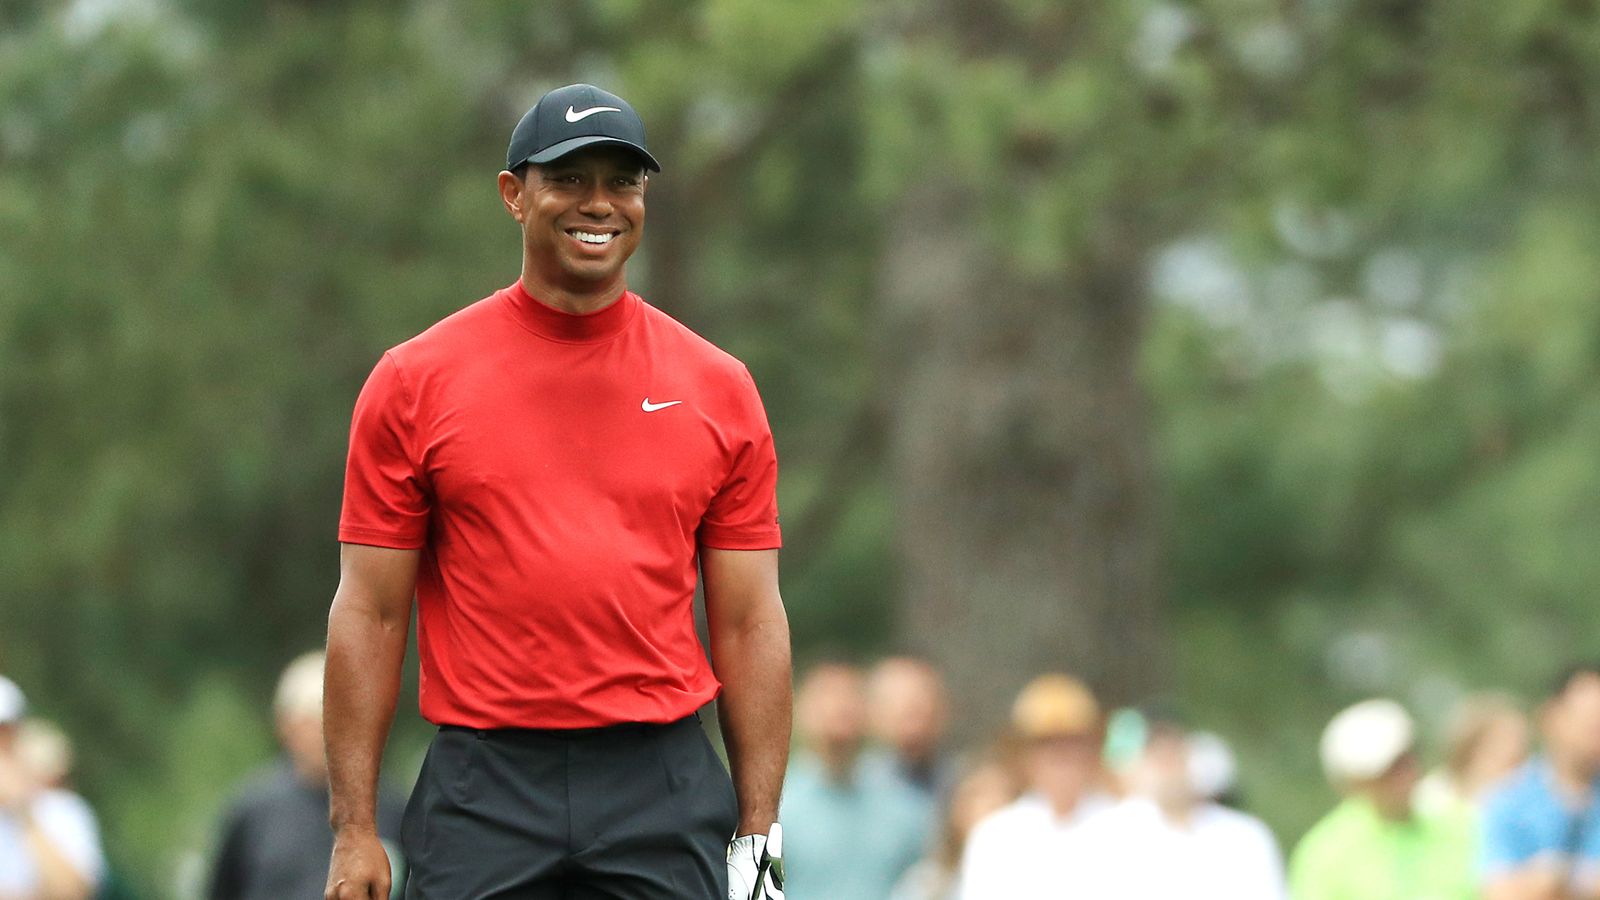 Tiger Woods to play in inaugural ZOZO Championship in Japan on PGA Tour | Golf News ...